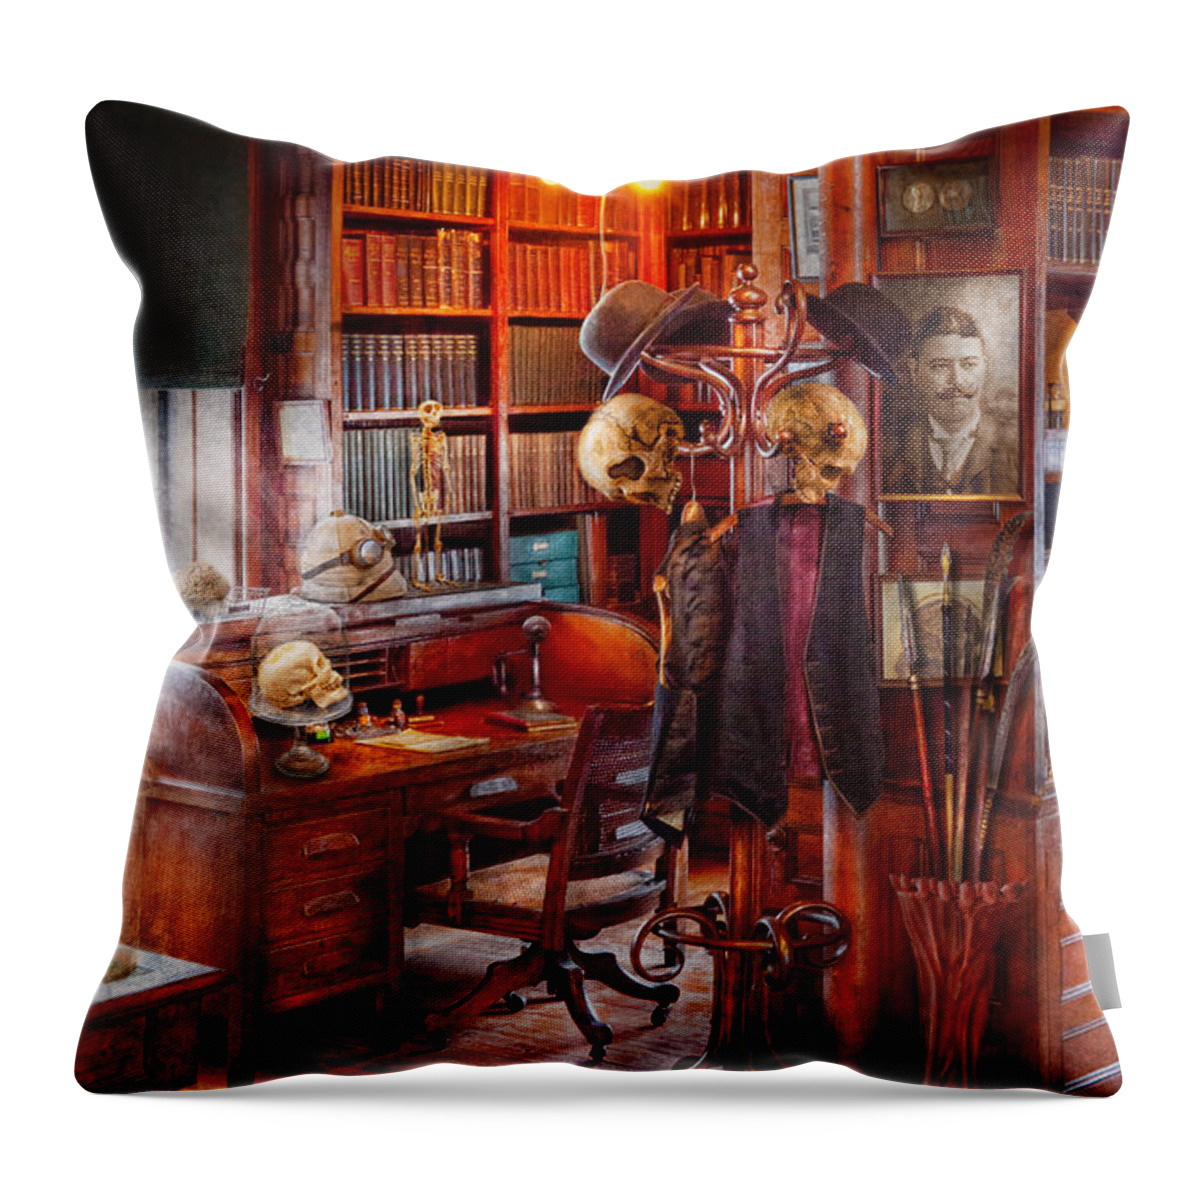 Headhunter Throw Pillow featuring the photograph Macabre - In the Headhunters study by Mike Savad